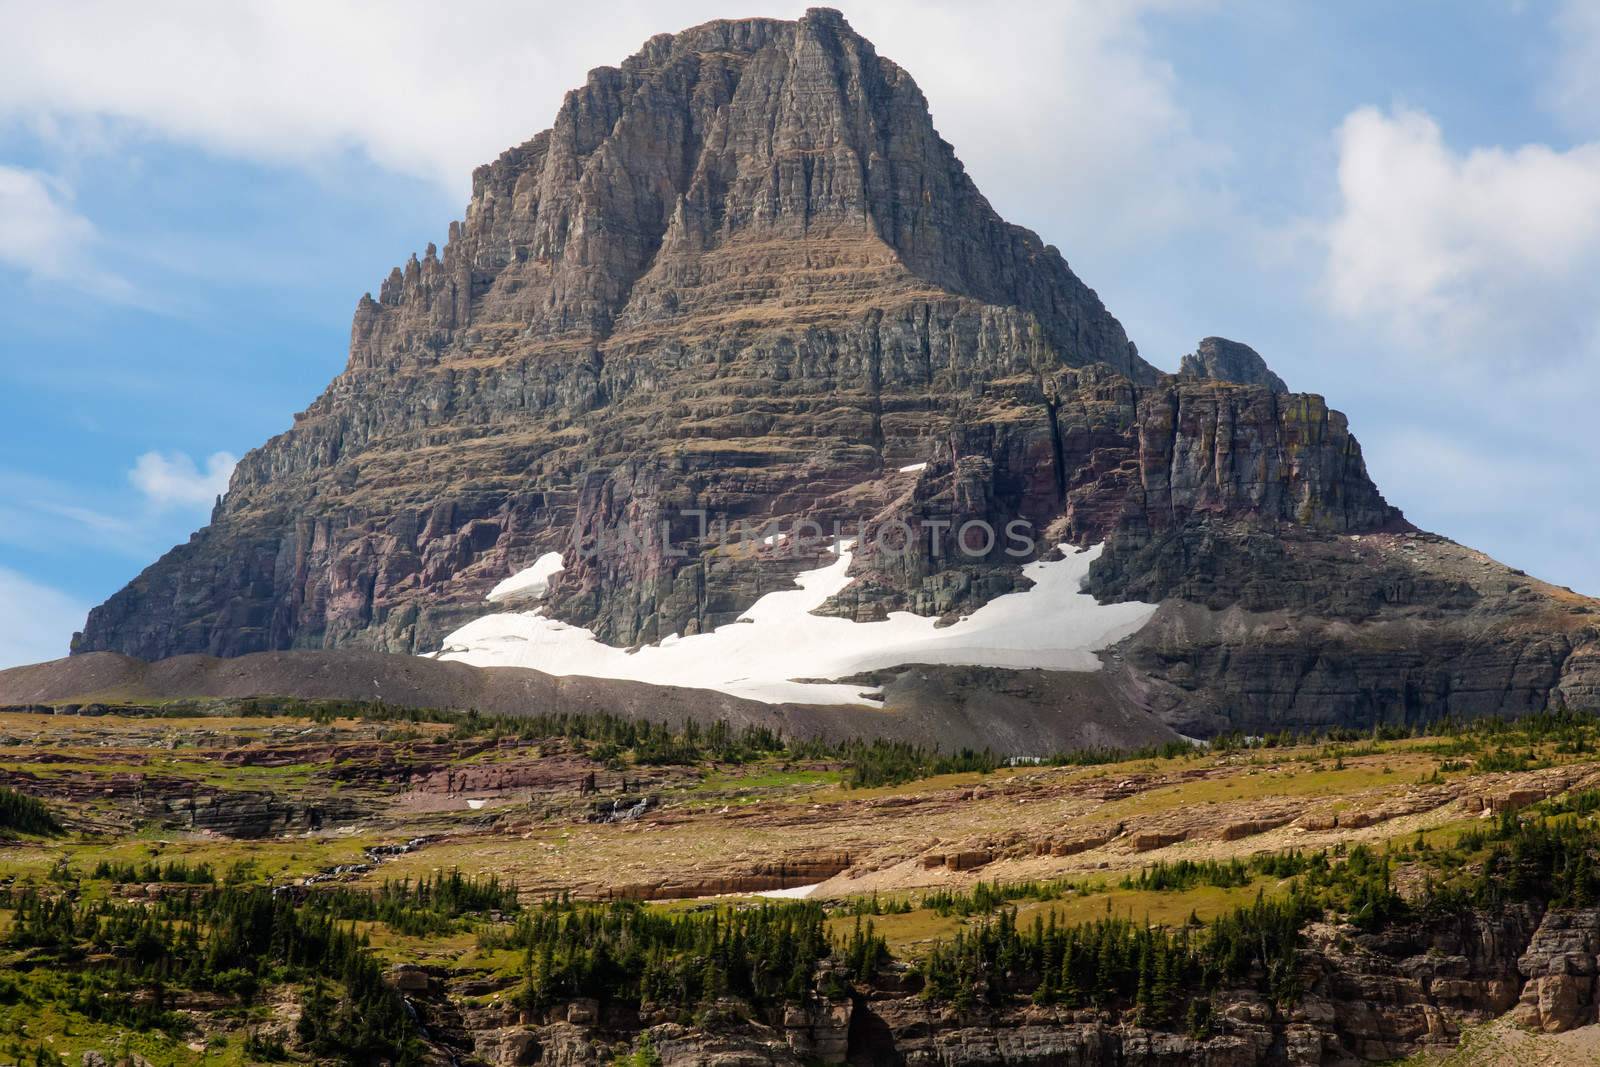 Taken at Glacier National Park at the Logan Pass area. There is wonderful hiking in this area but the different scenes are so abundant it was a constant stop and go walk.